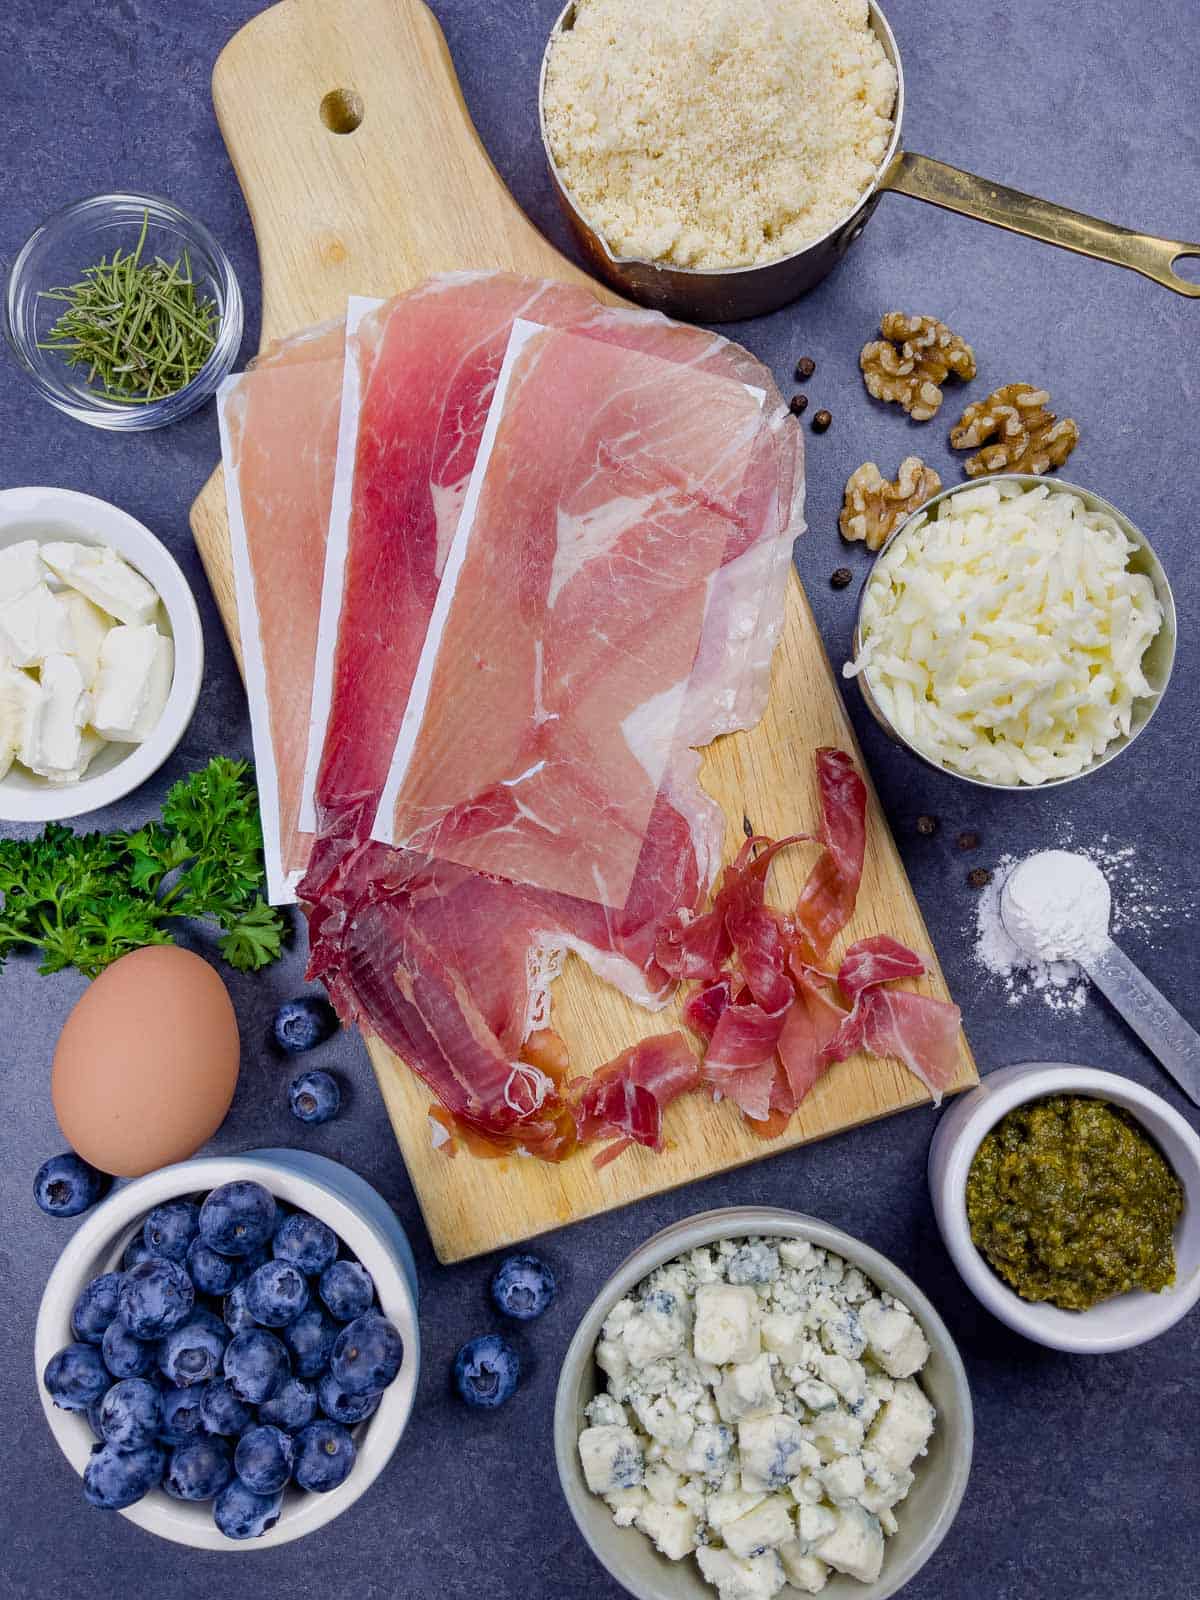 Pizza ingredients on a board including prosciutto, gorgonzola, rosemary, and blueberries in ramekins.